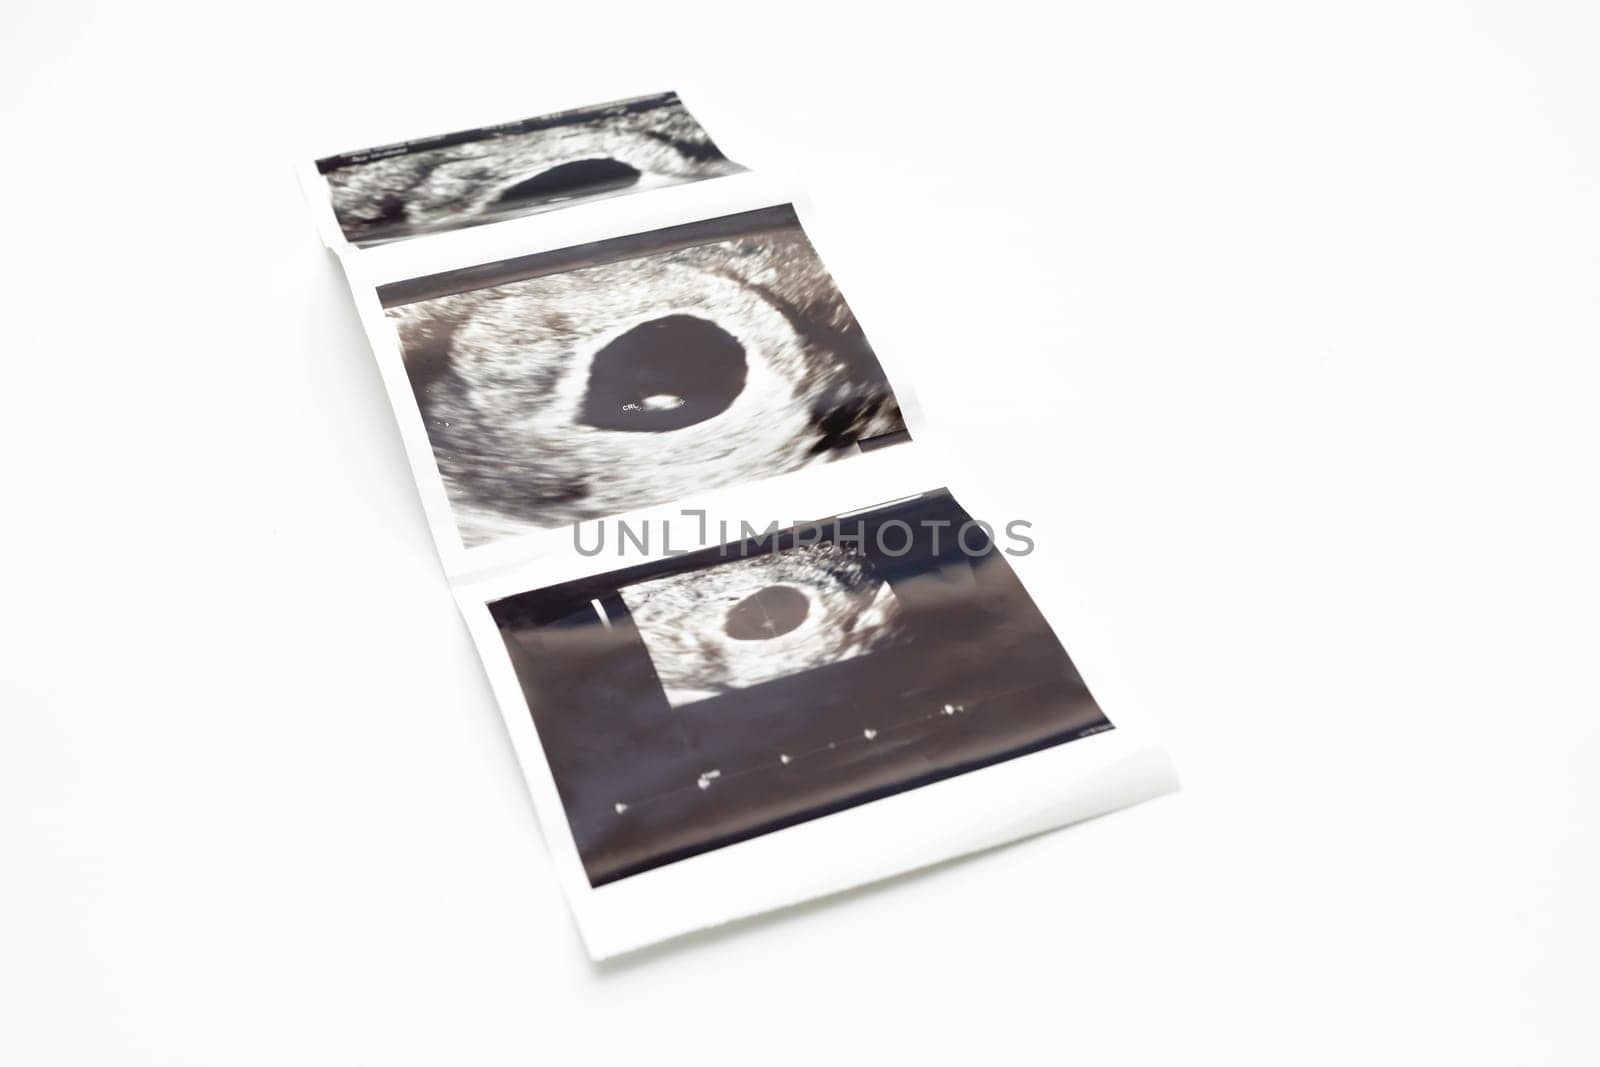 Ultrasound Picture Of 6 Weeks Fetus of Pregnant Woman, Embryo Image On White Background. Selective Focus. Fetus Development, Pregnancy Health Checking. Maternity, Horizontal by netatsi